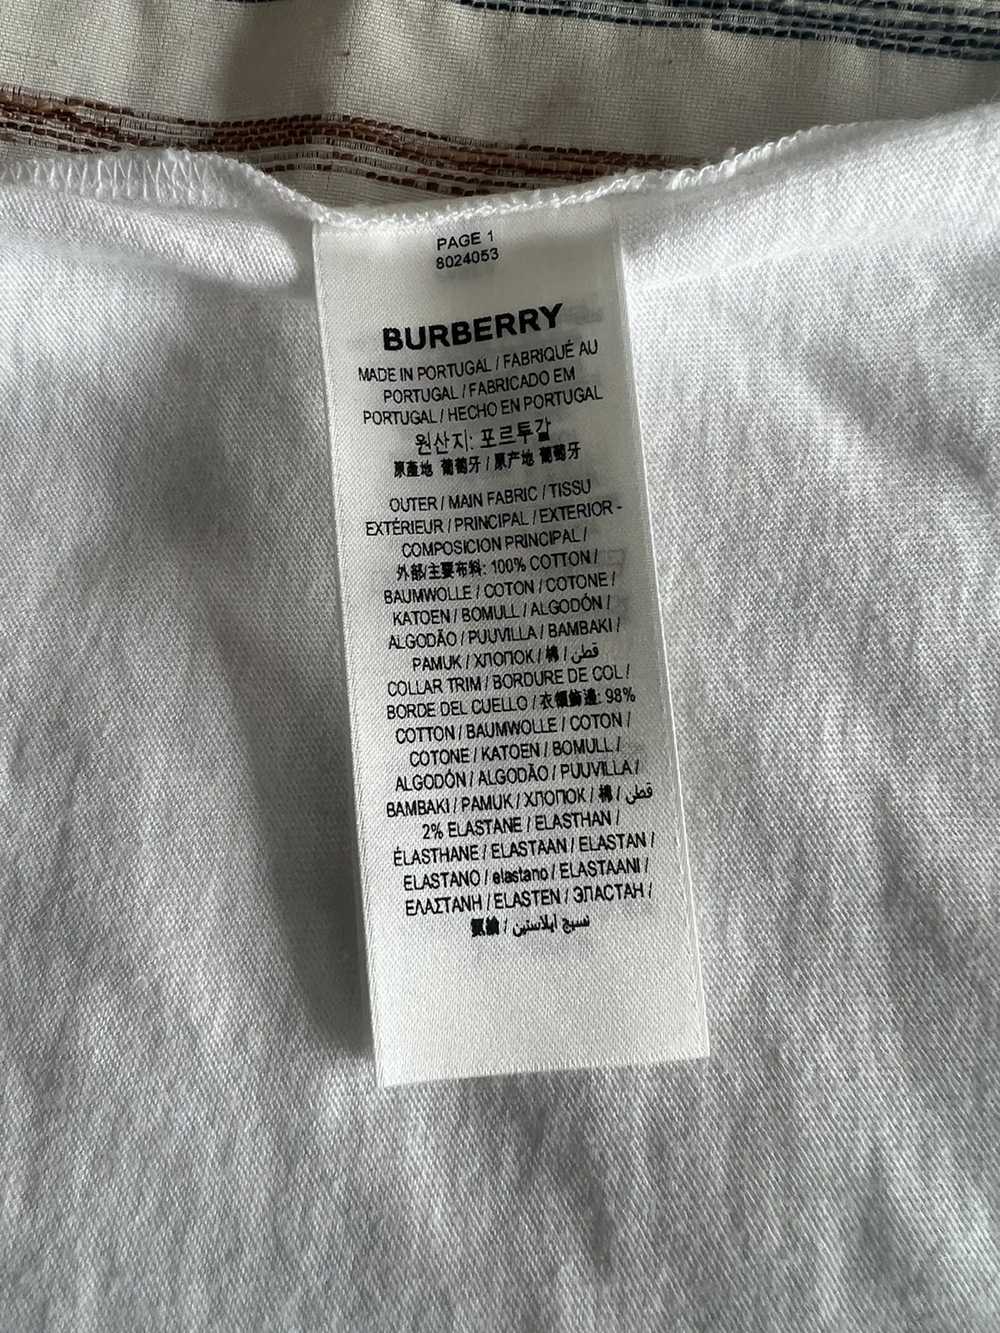 Burberry Burberry t shirt dry clean no stains wor… - image 6